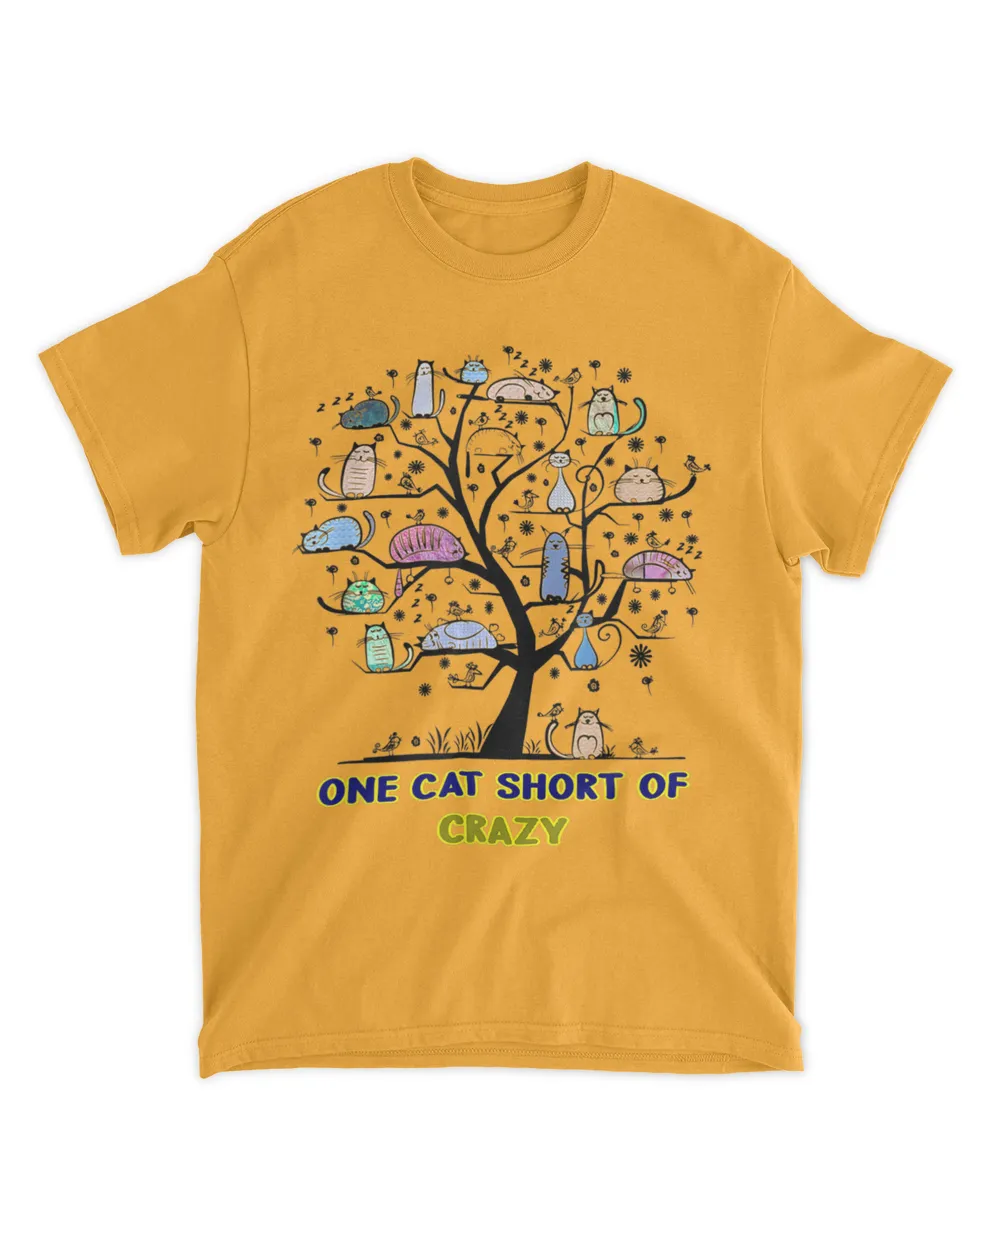 One Cat Short of Crazy - Crazy Cat Lady - Cats in a Tree HOC300323A14